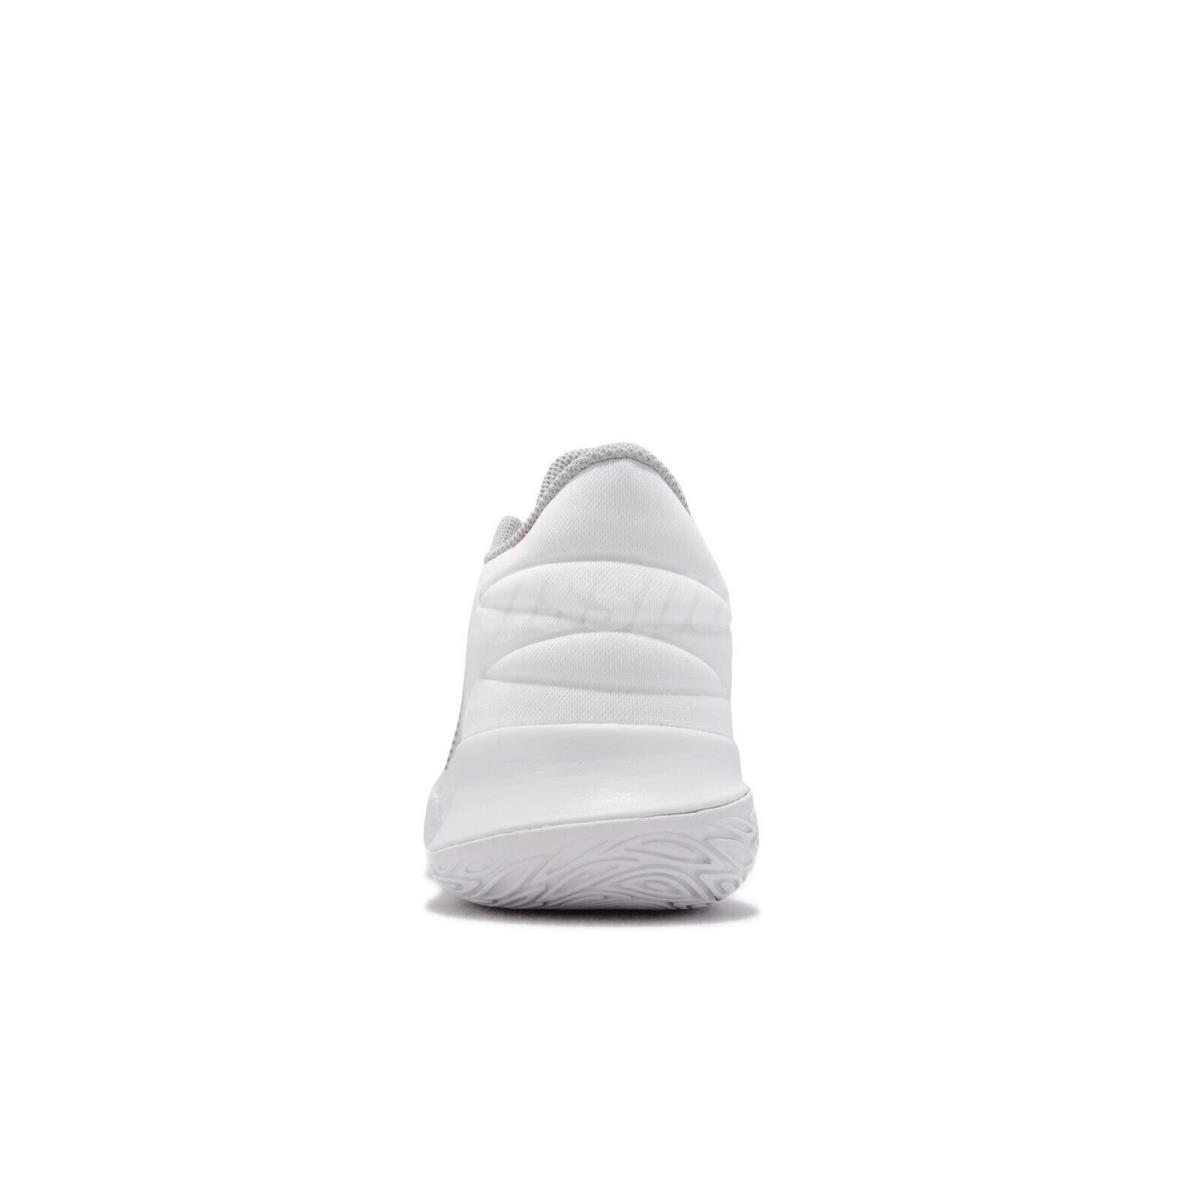 Nike shoes Kyrie - White/ Red , white/ red Manufacturer 4